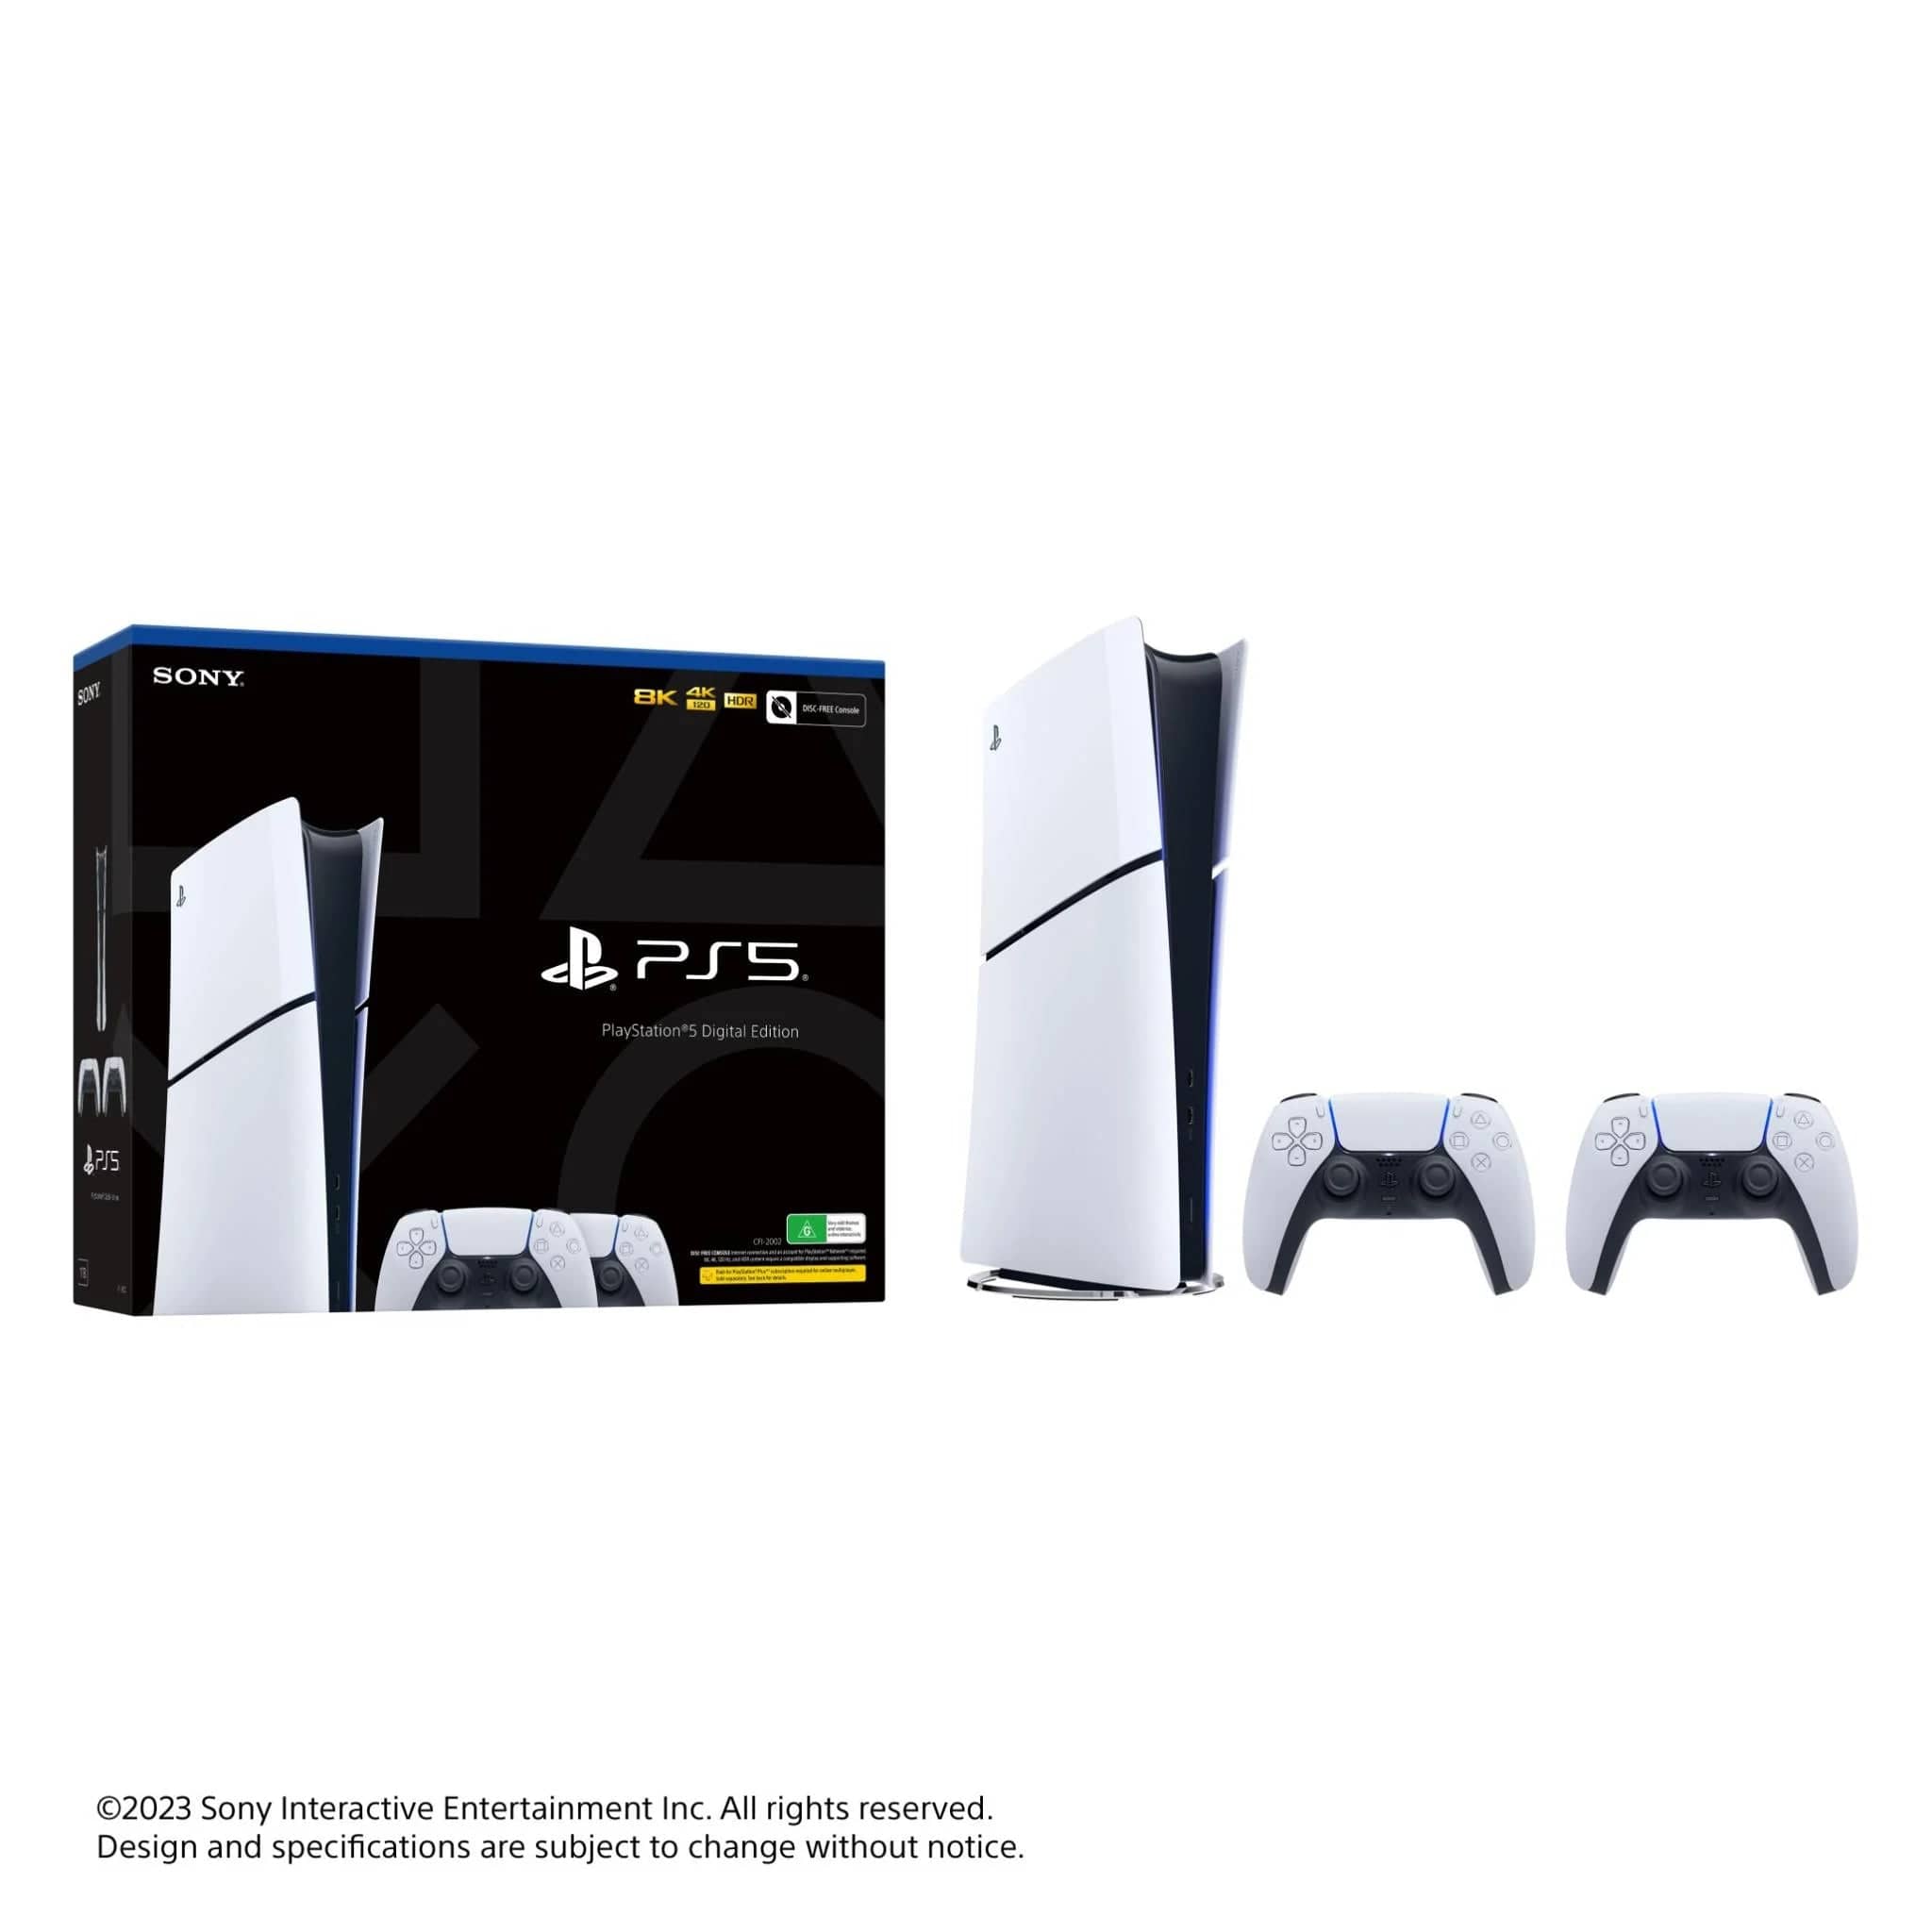 SONY Video Game Consoles PLAYSTATION5WD